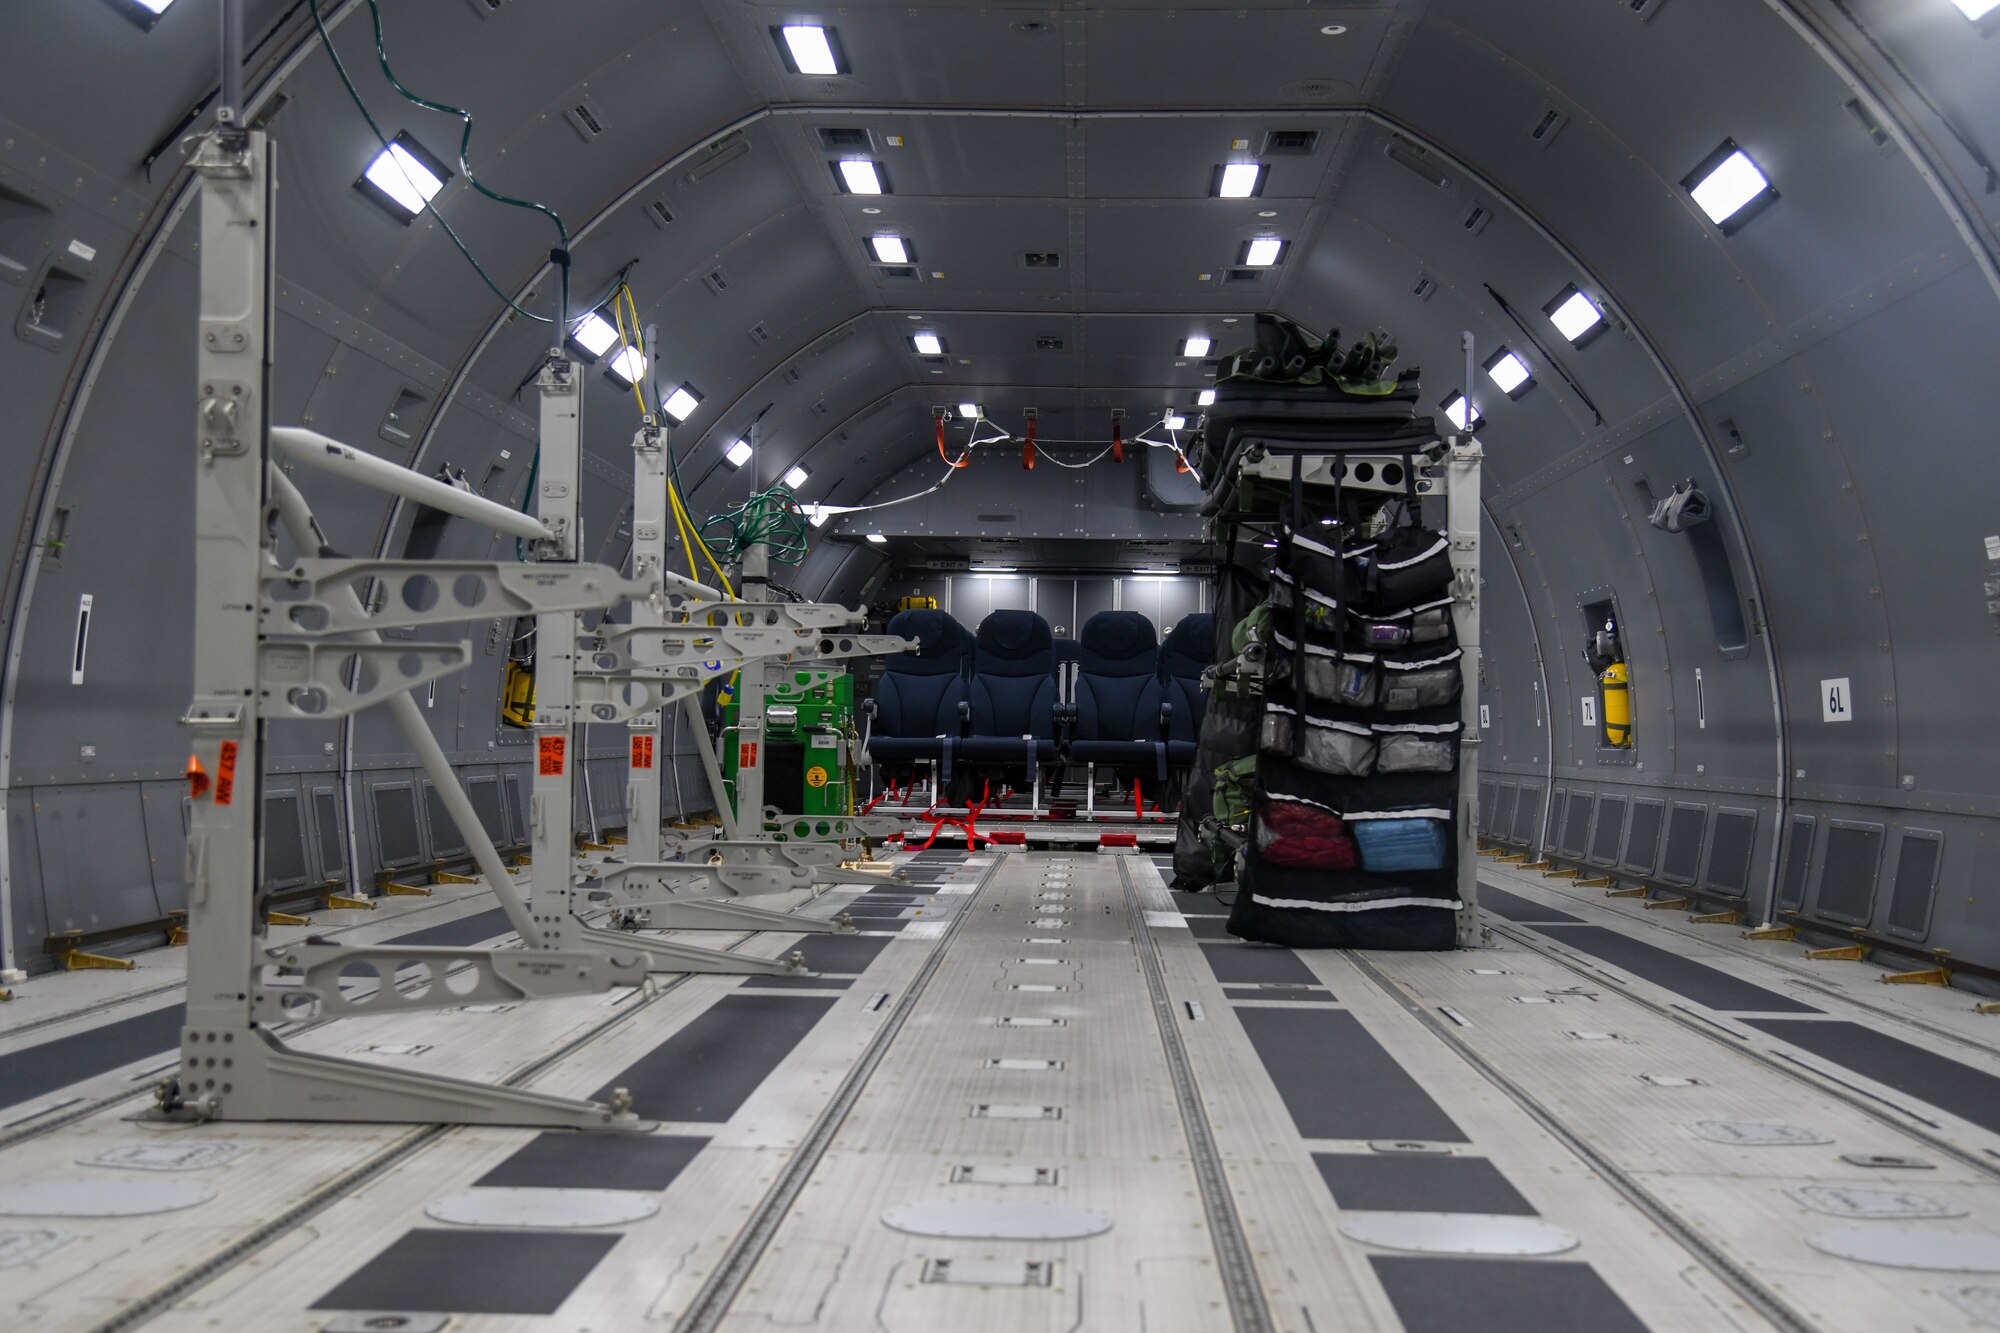 Litter stations stand assembled in the fuselage of a KC-46A Pegasus prior to patient arrival July 10, 2020, at Joint Base Andrews, Maryland. Prior to the mission, the aircraft was configured to support patient movement. A litter stanchion augmentation set container was secured on the aircraft  to store the equipment required to build up to nine litter stations. (U.S. Air Force photo by Airman 1st Class Nilsa Garcia)